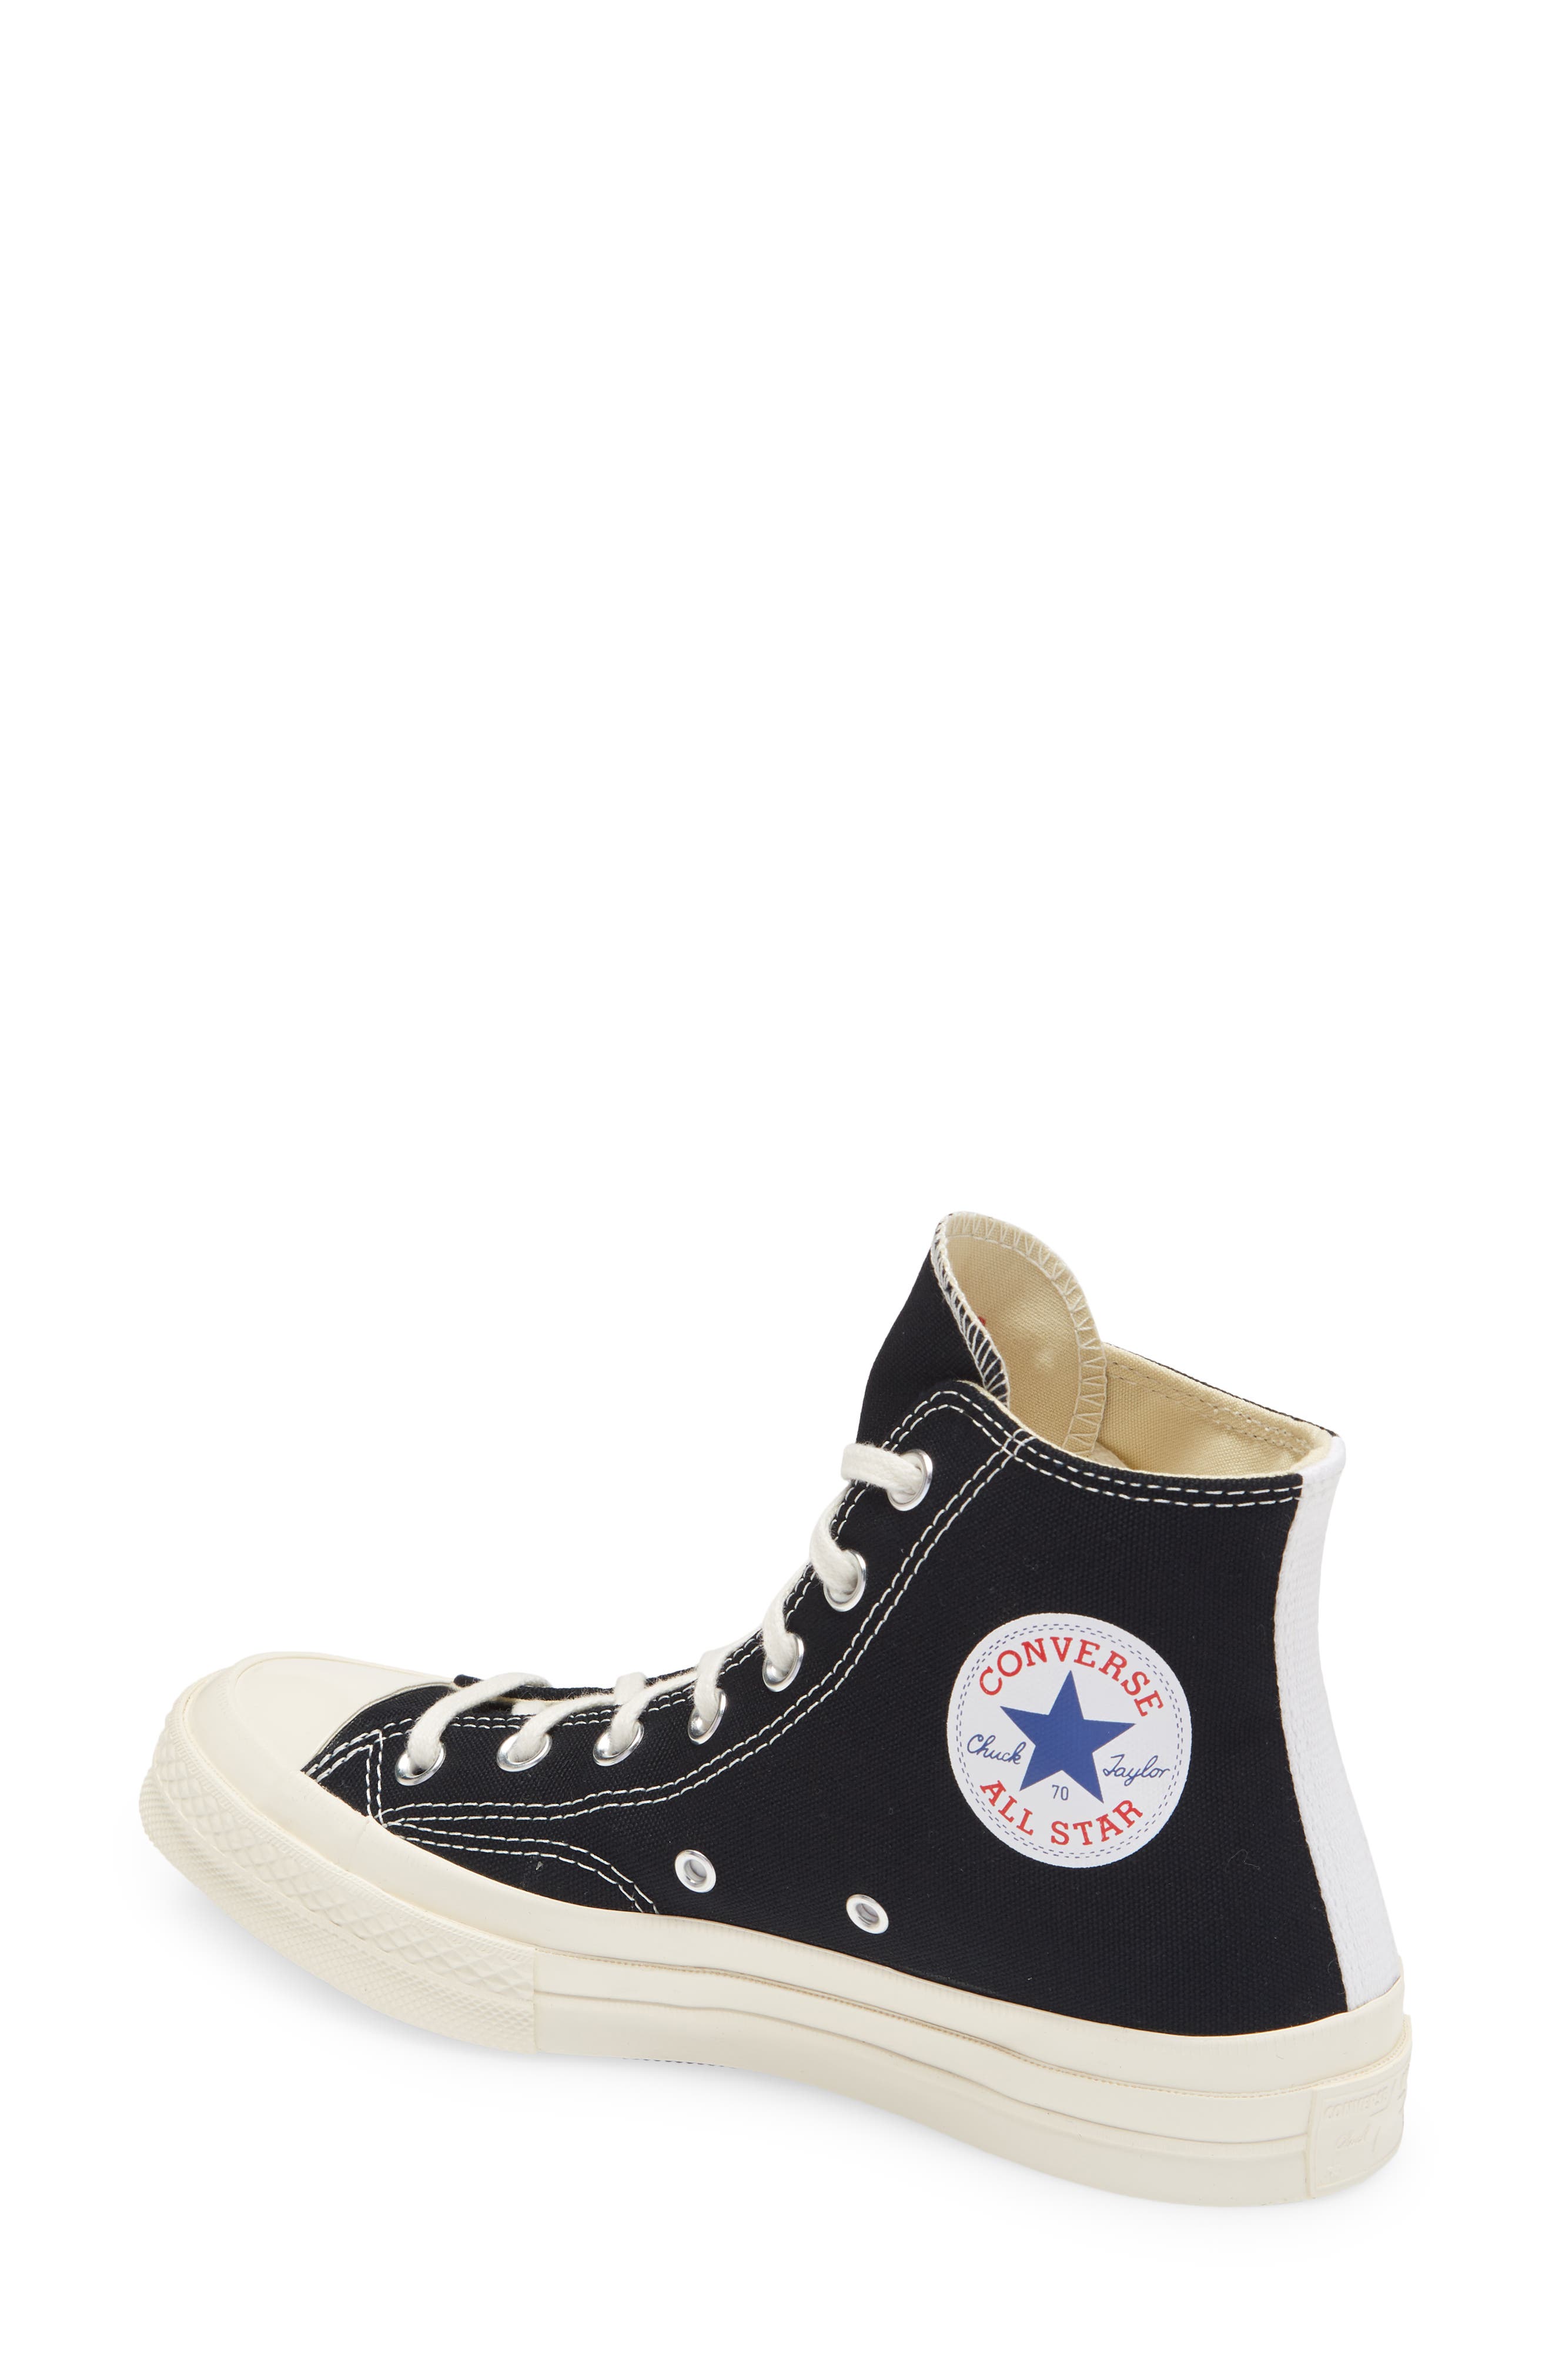 cdg x converse shoes